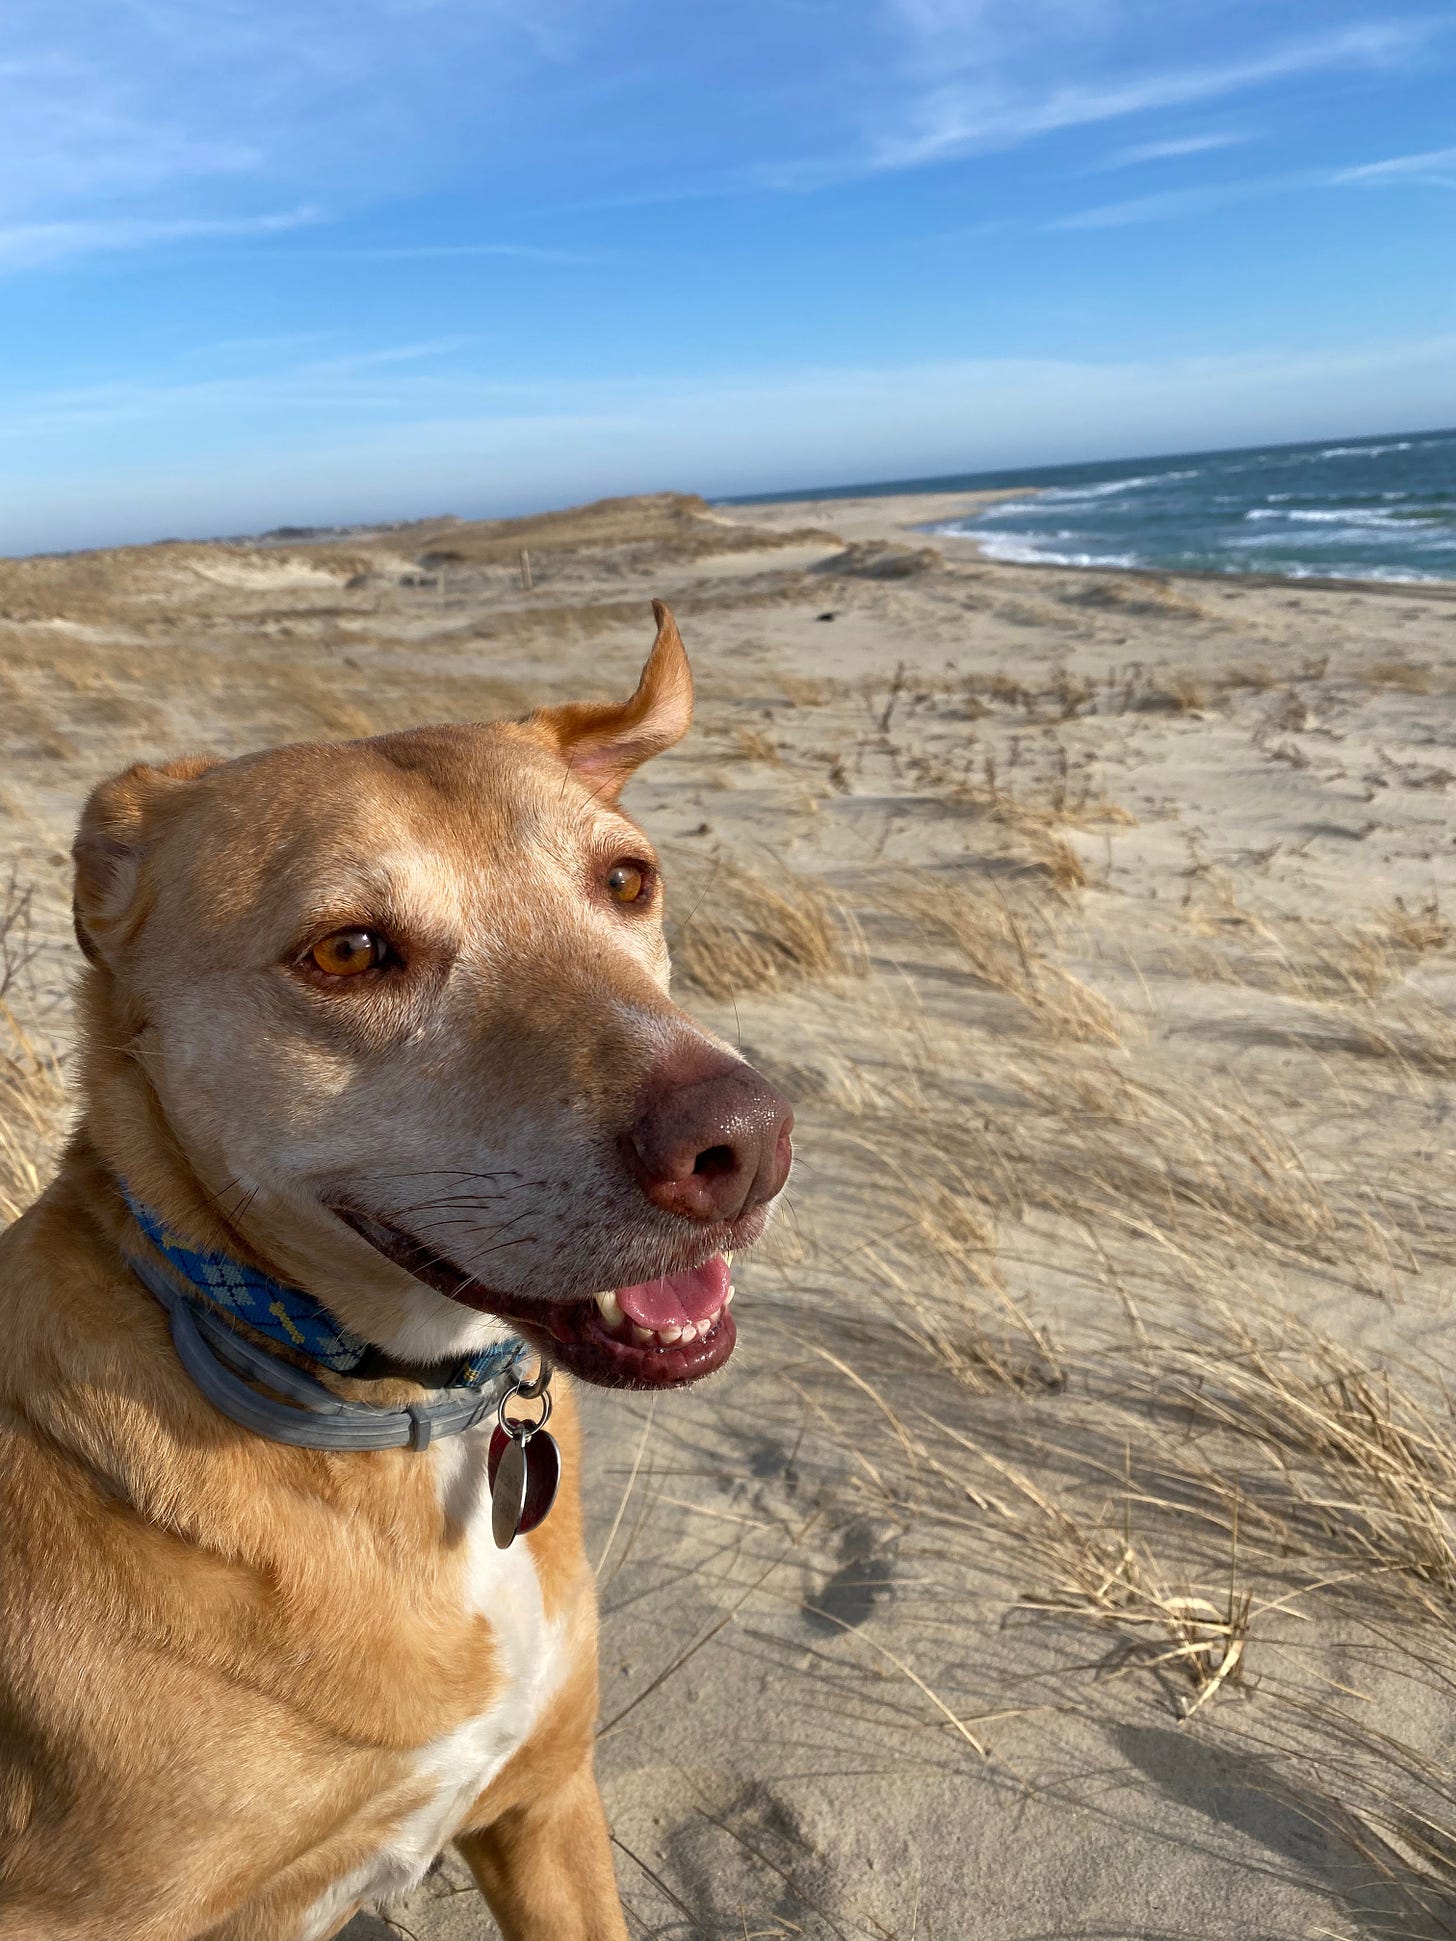 Nessa, a medium sized golden-brown dog, is sitting on a windswept beach. Her mouth is open, and one ear is flapping up in the wind. She looks happy.